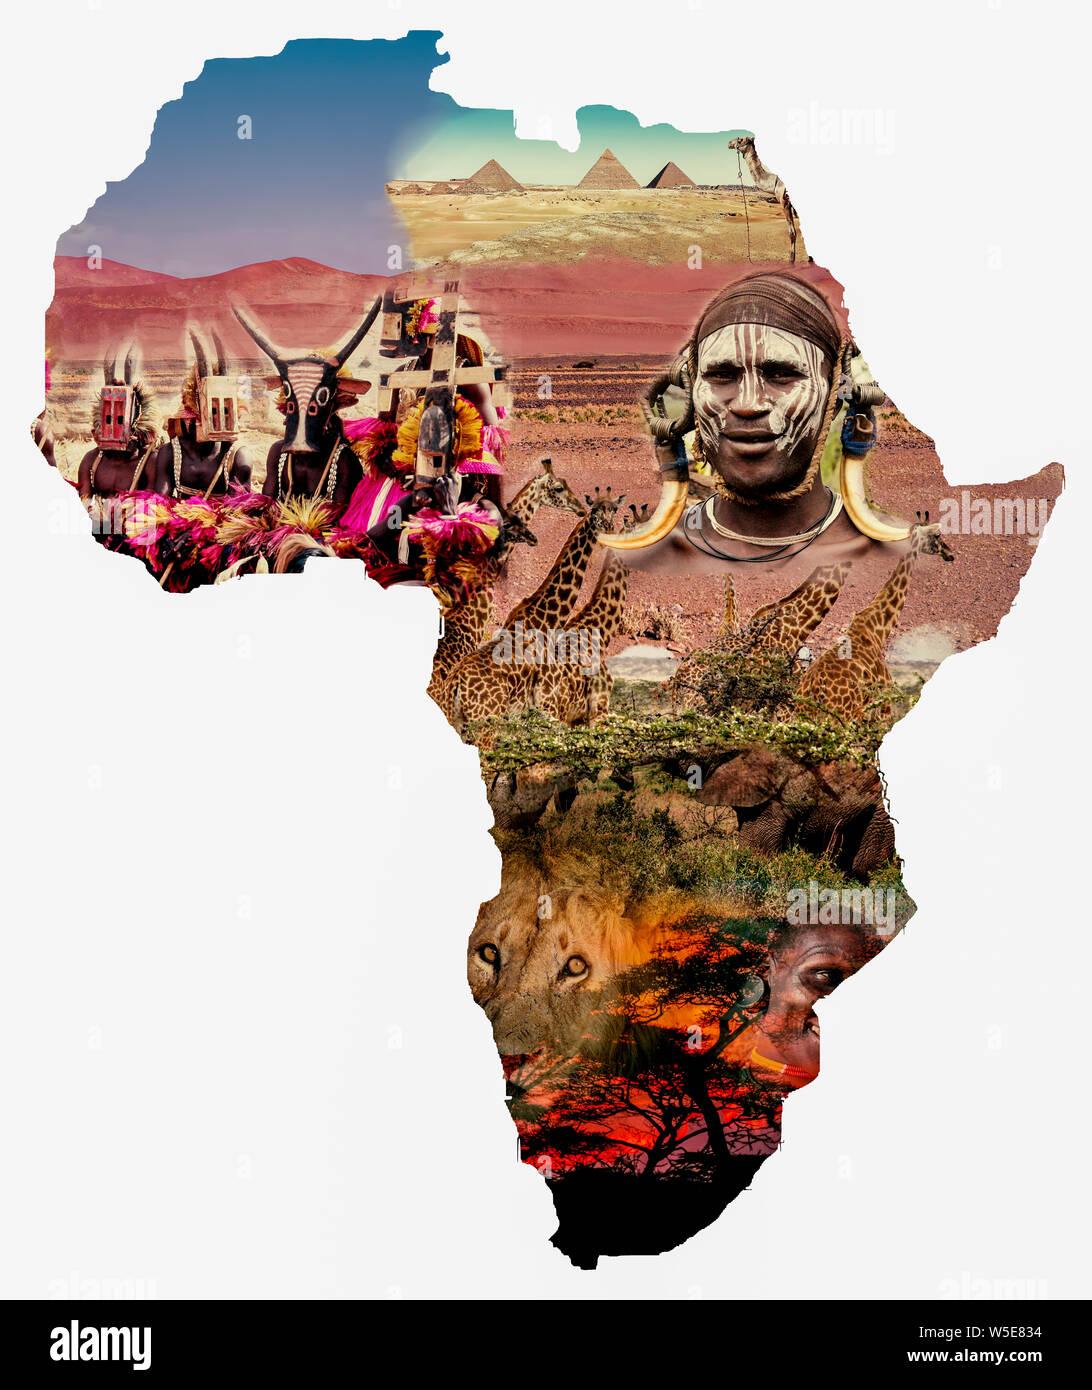 Digitally enhanced image of an Africa Map collage with local images of people, wildlife and scenery Stock Photo